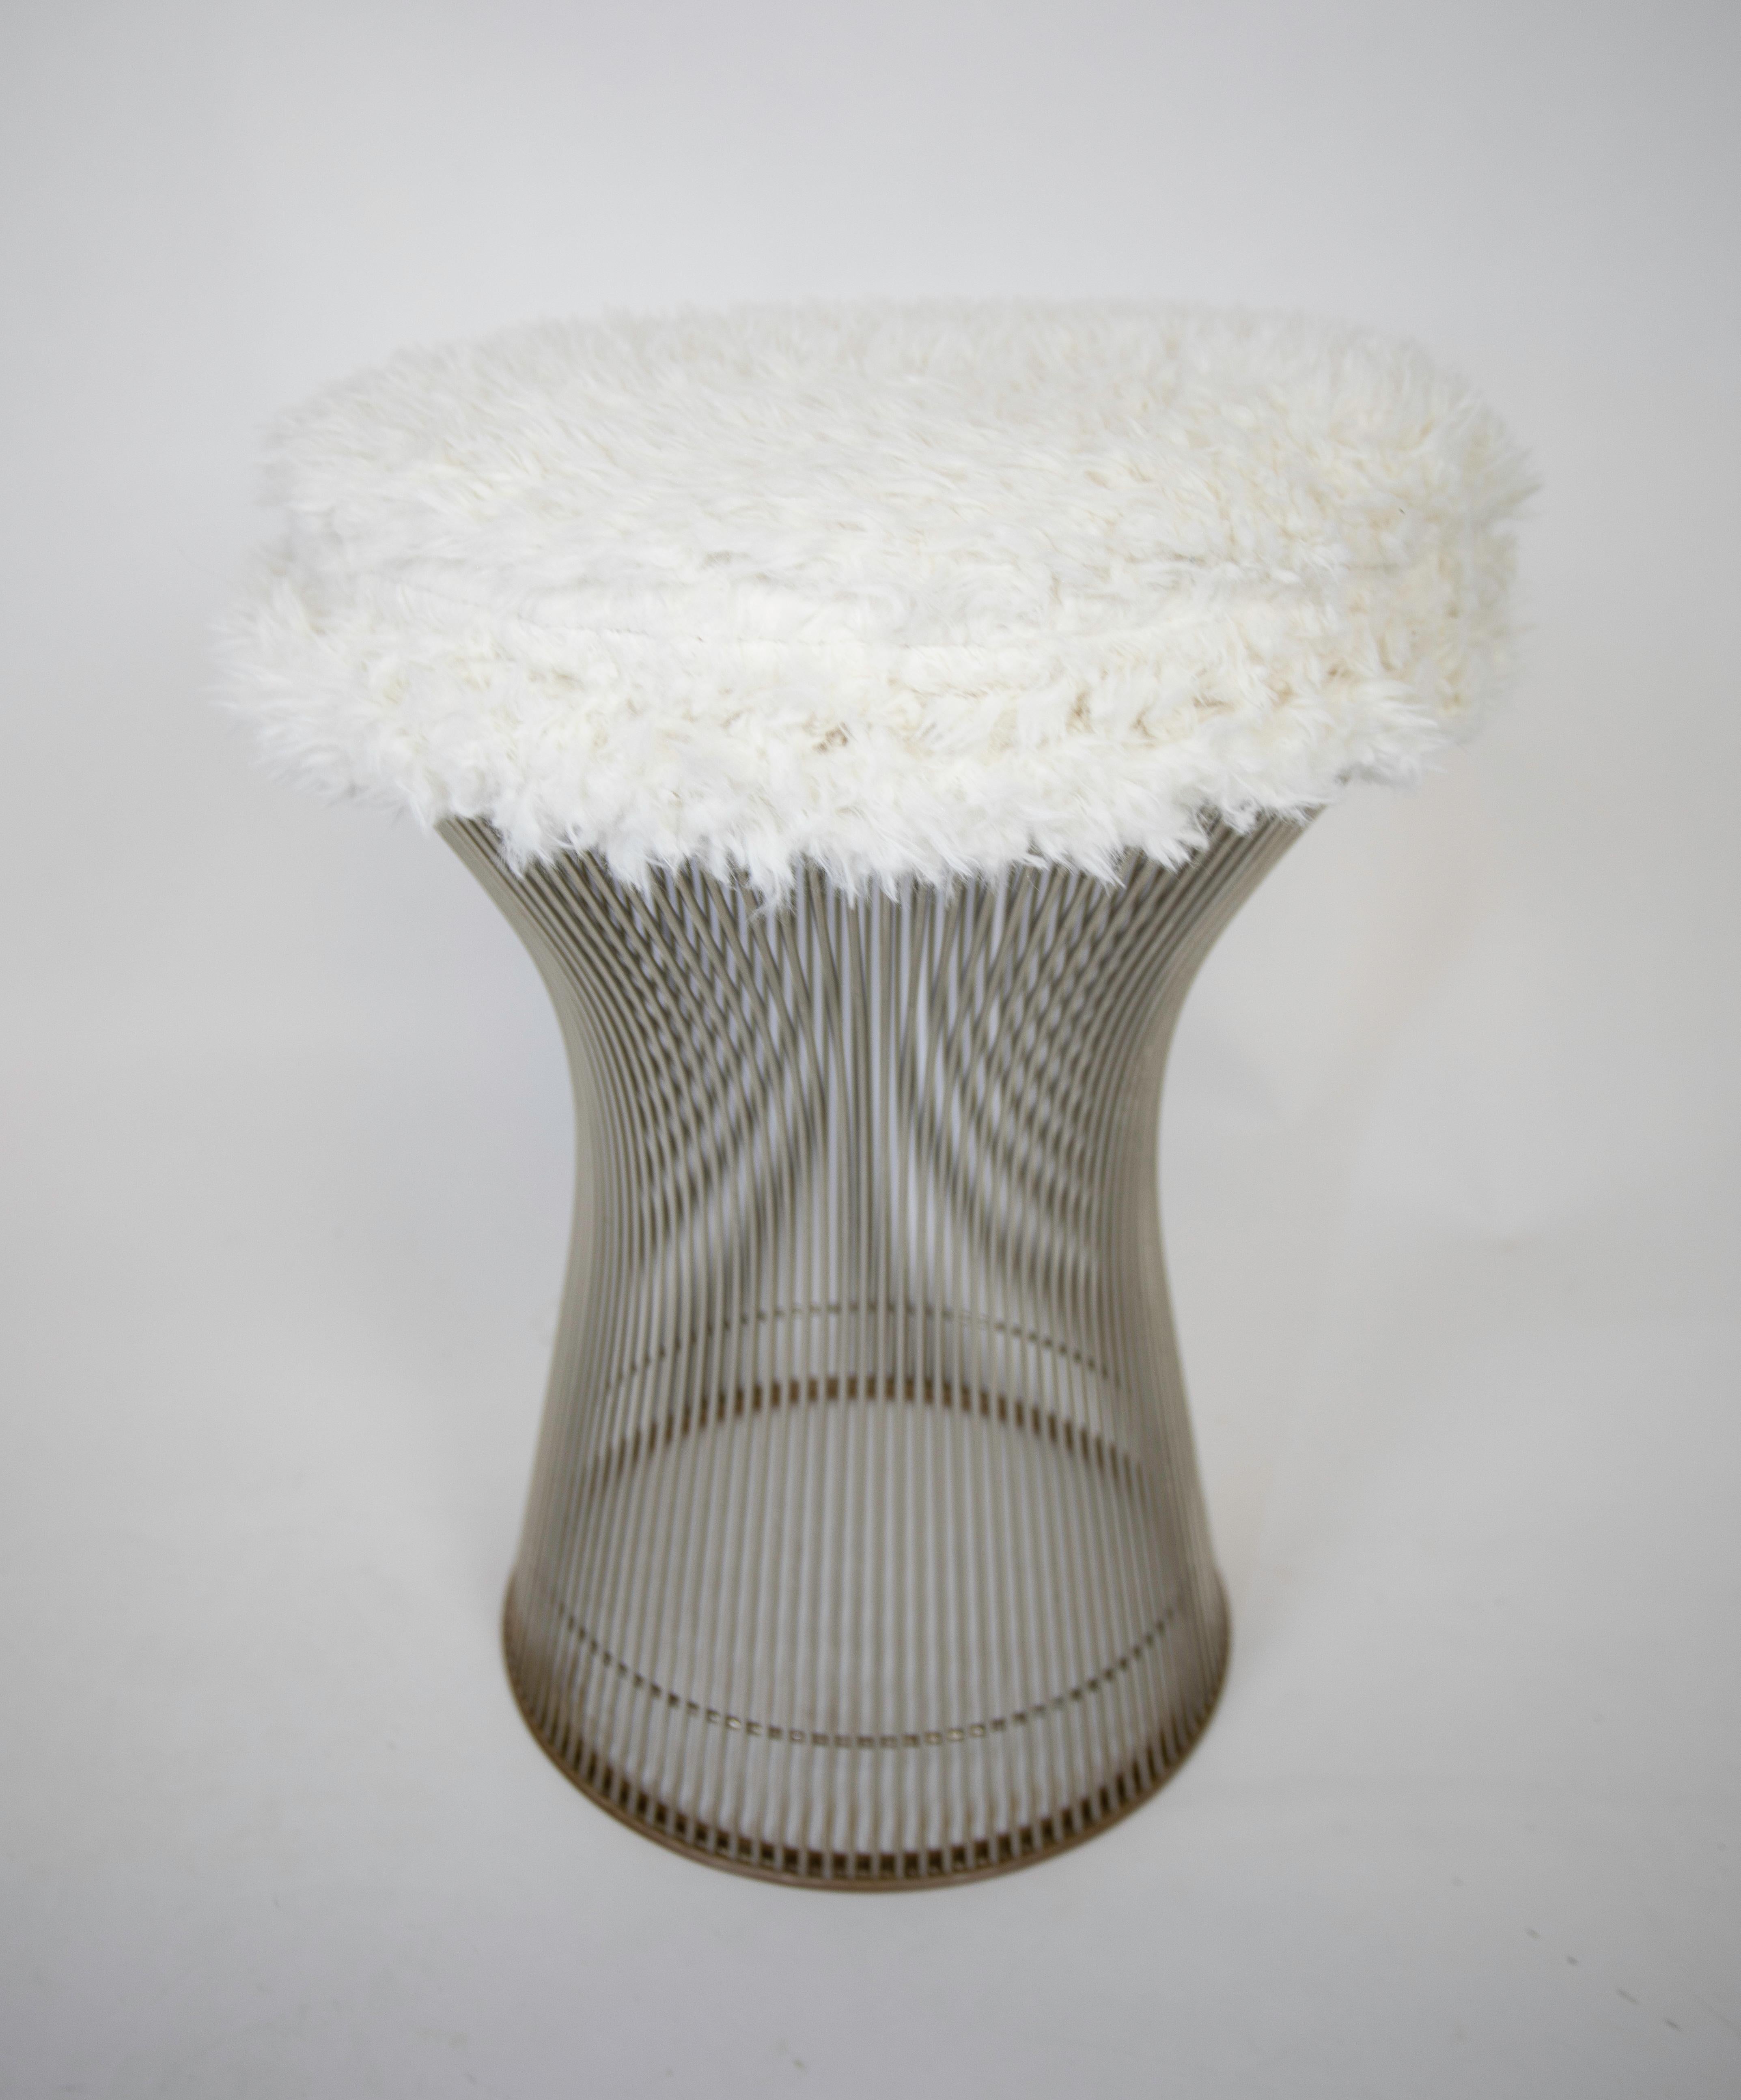 A vintage Warren Platner Stool
Manufactured by Knoll
Re-Upholstered in faux fur.